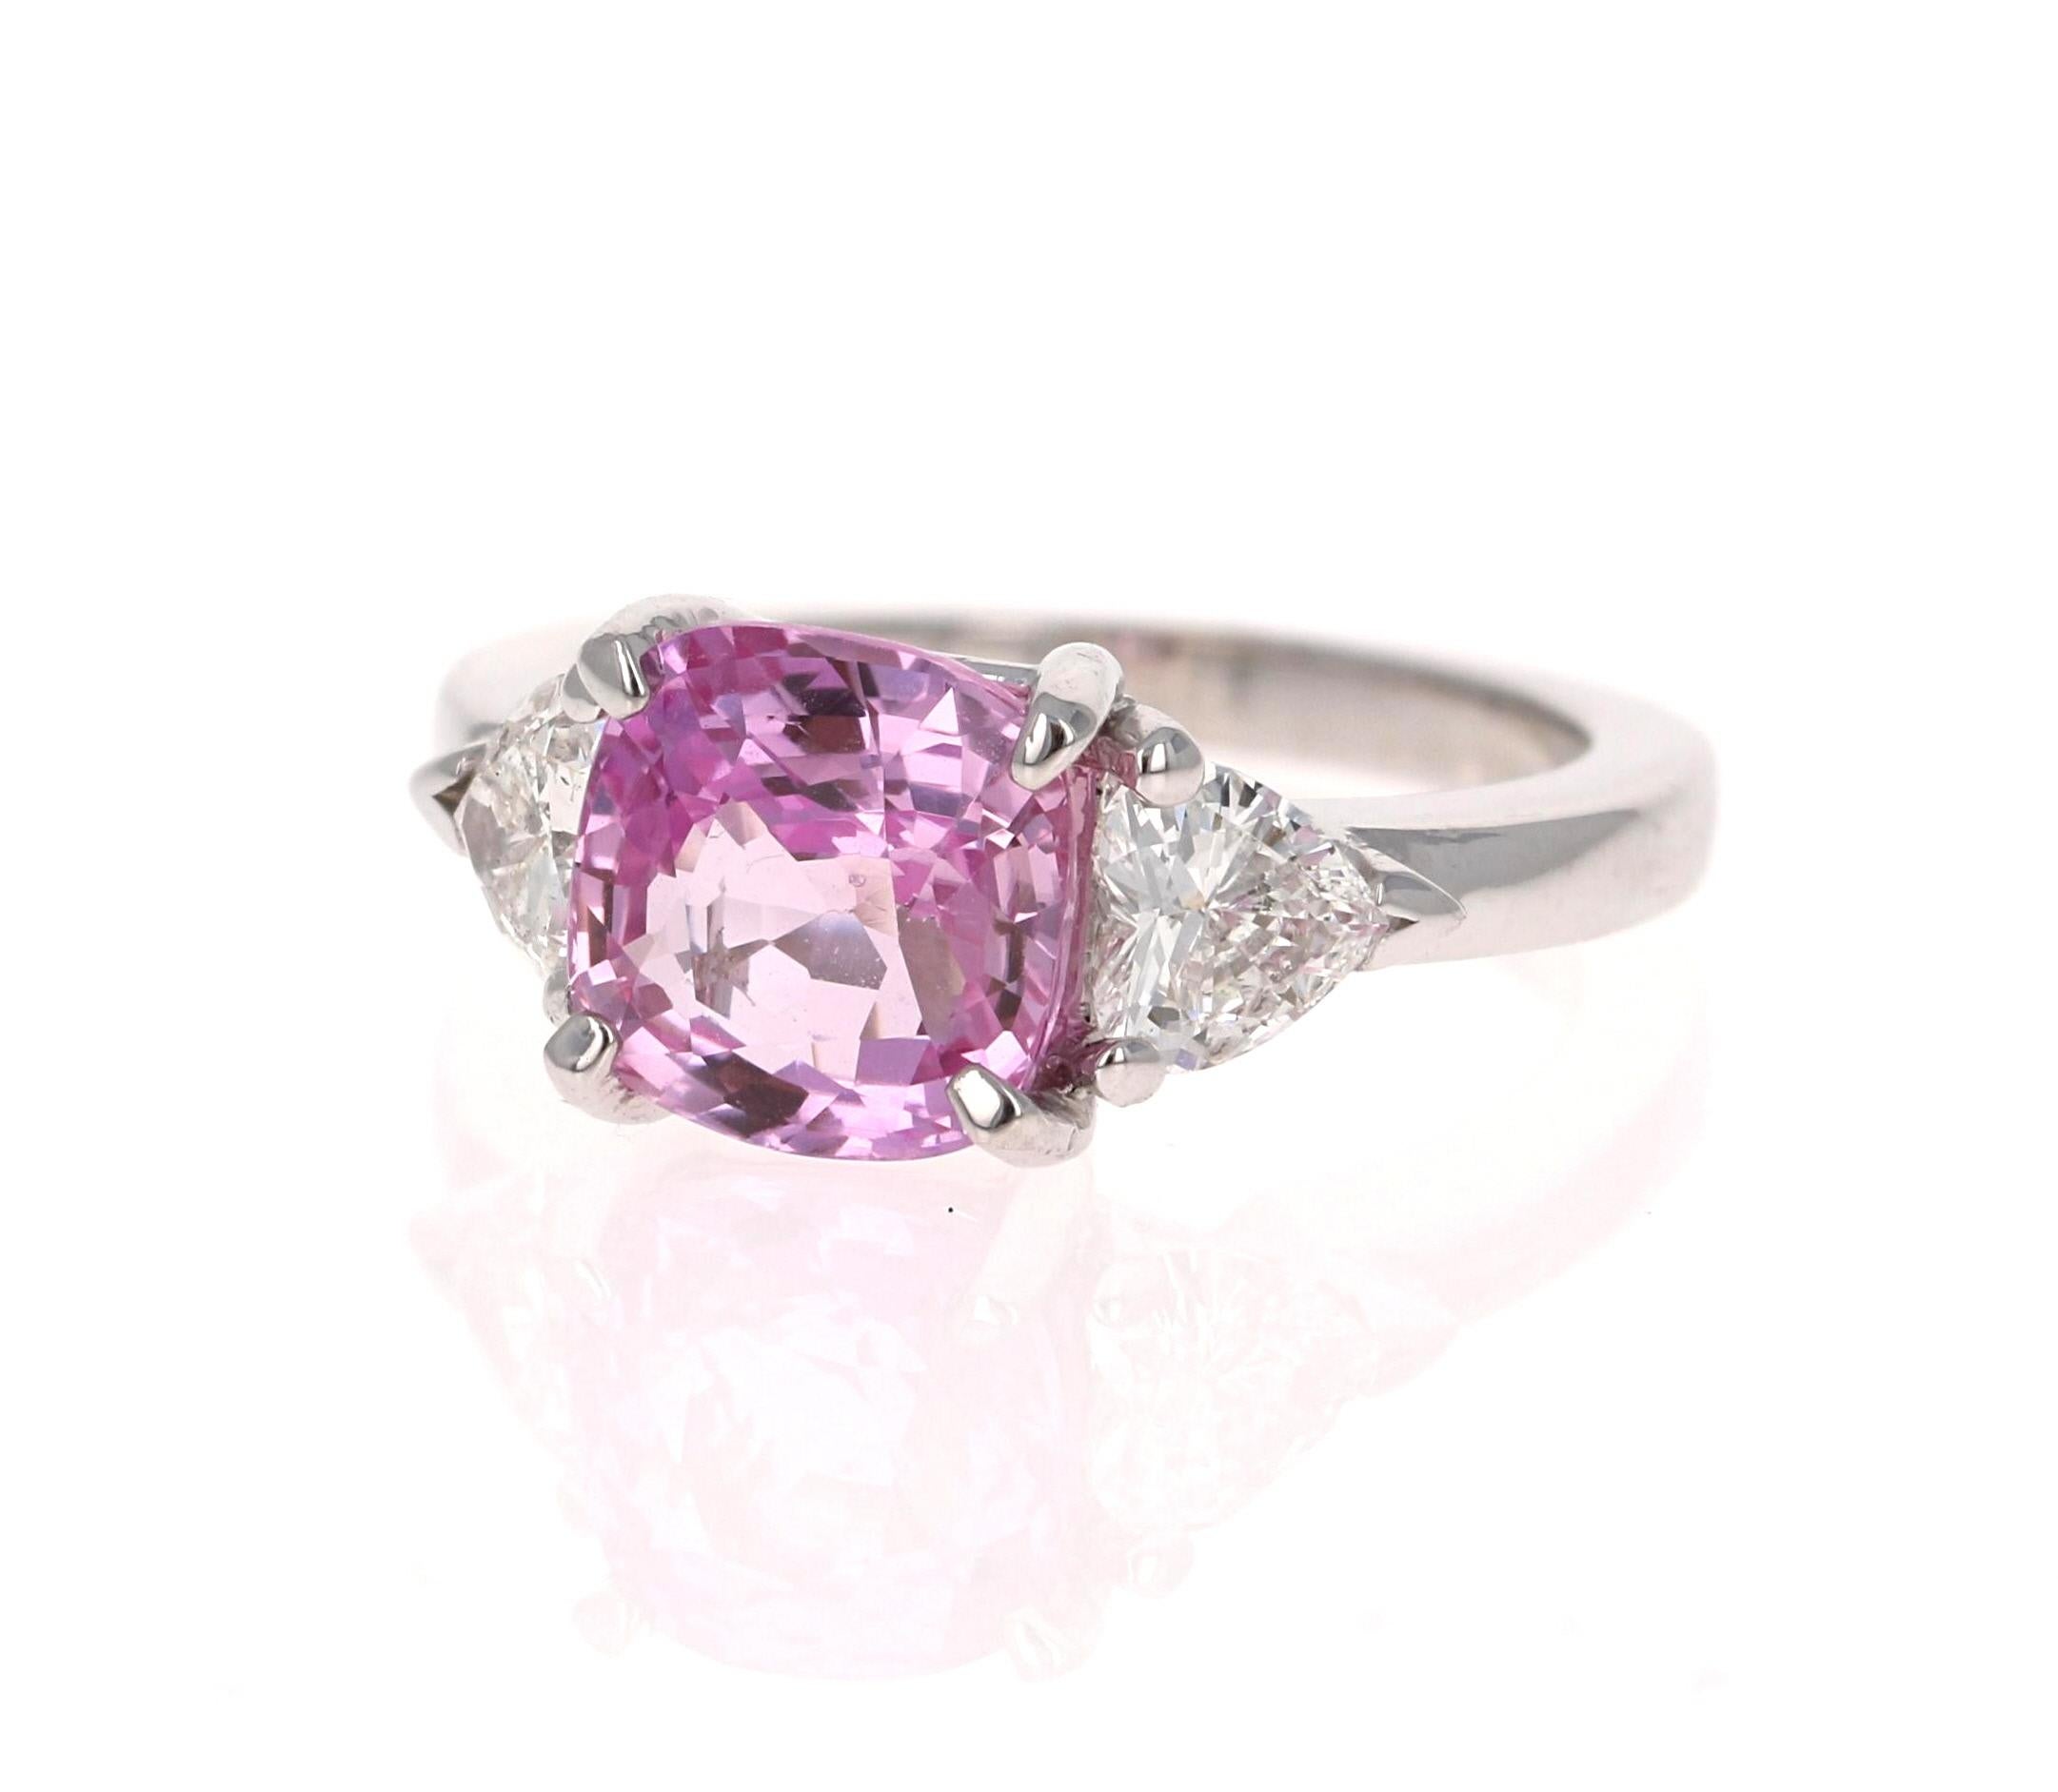 Exquisite Pink Sapphire and Diamond Ring! Can be an everyday ring or a unique Engagement Ring!

This beautiful ring has a Square-Cushion Cut Pink Sapphire that weighs 3.03 Carat. The Pink Sapphire is GIA Certified (Cert #: 6214048666 which can be